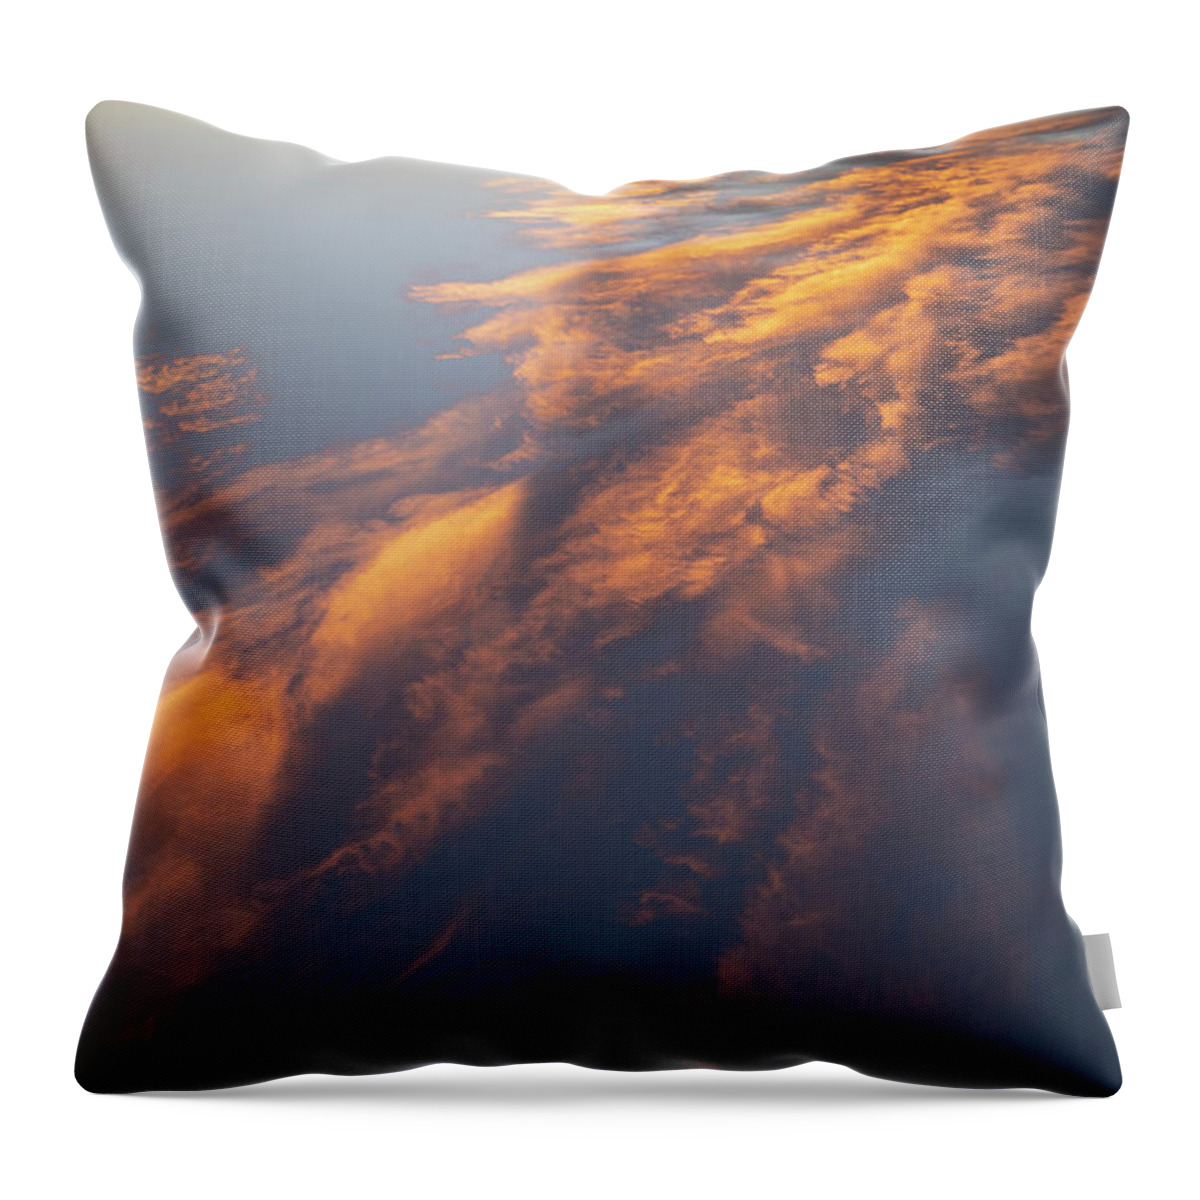 Sky Throw Pillow featuring the photograph Clouds At Sunset by Karen Rispin